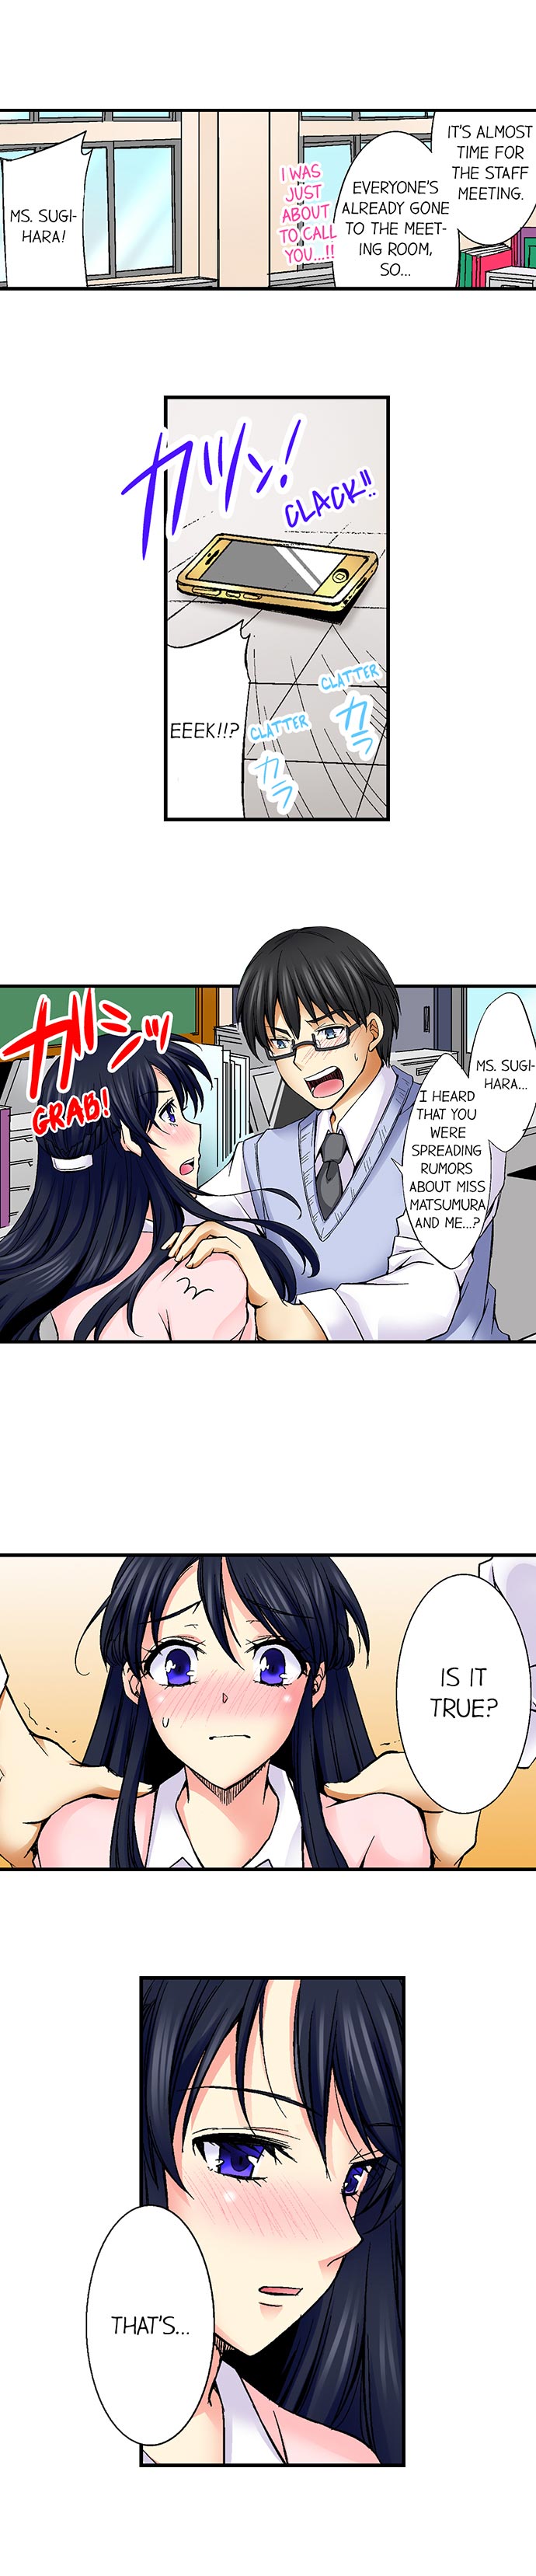 Why Can't i Have Sex With My Teacher? - Chapter 16 Page 9